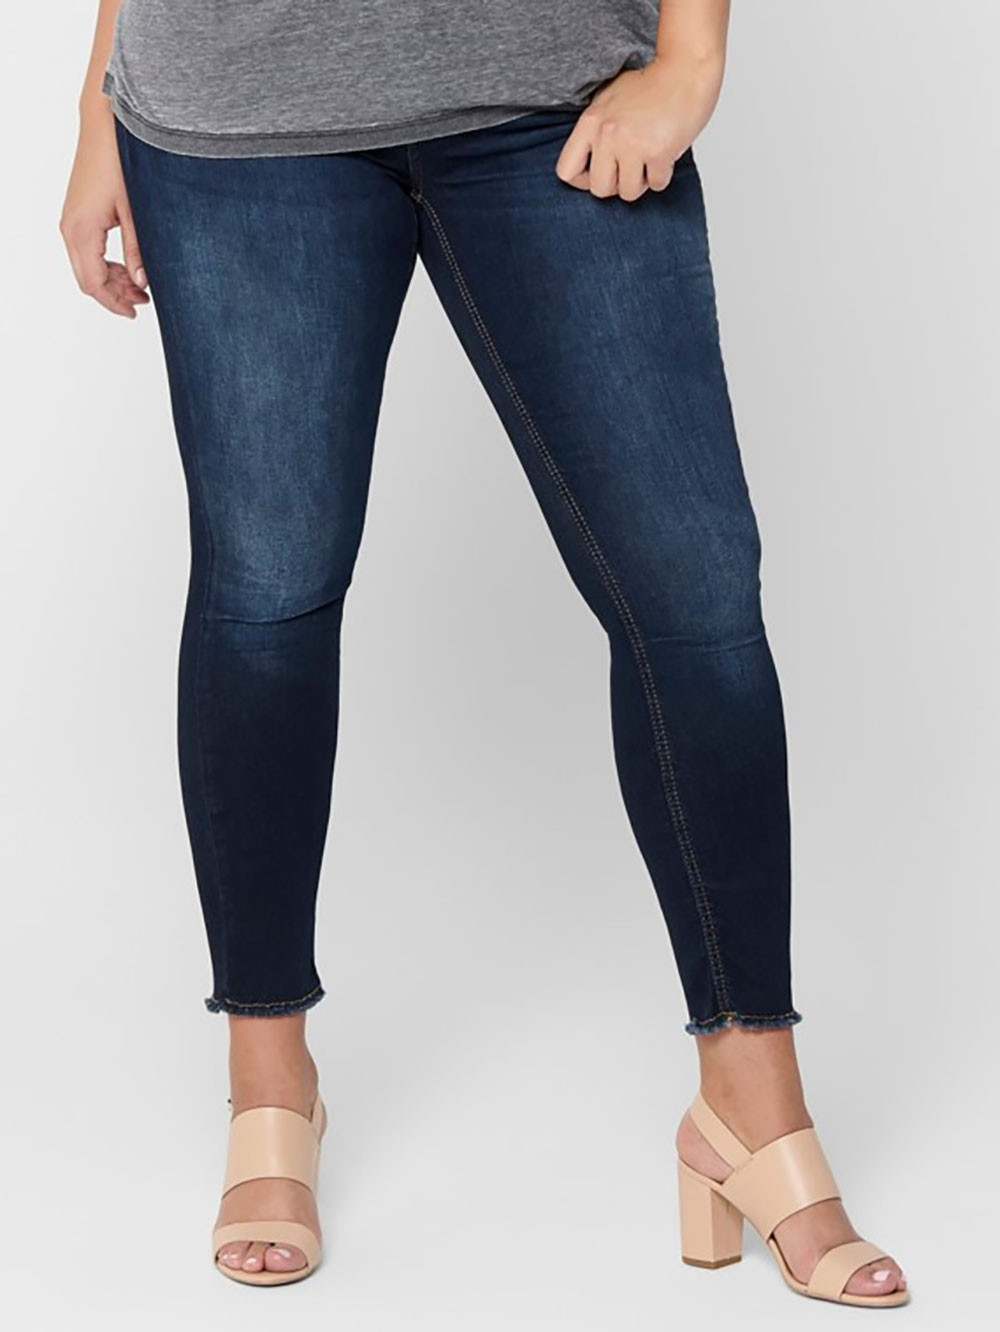 WILLY - Lyse stretch jeans med frynser ved anklen